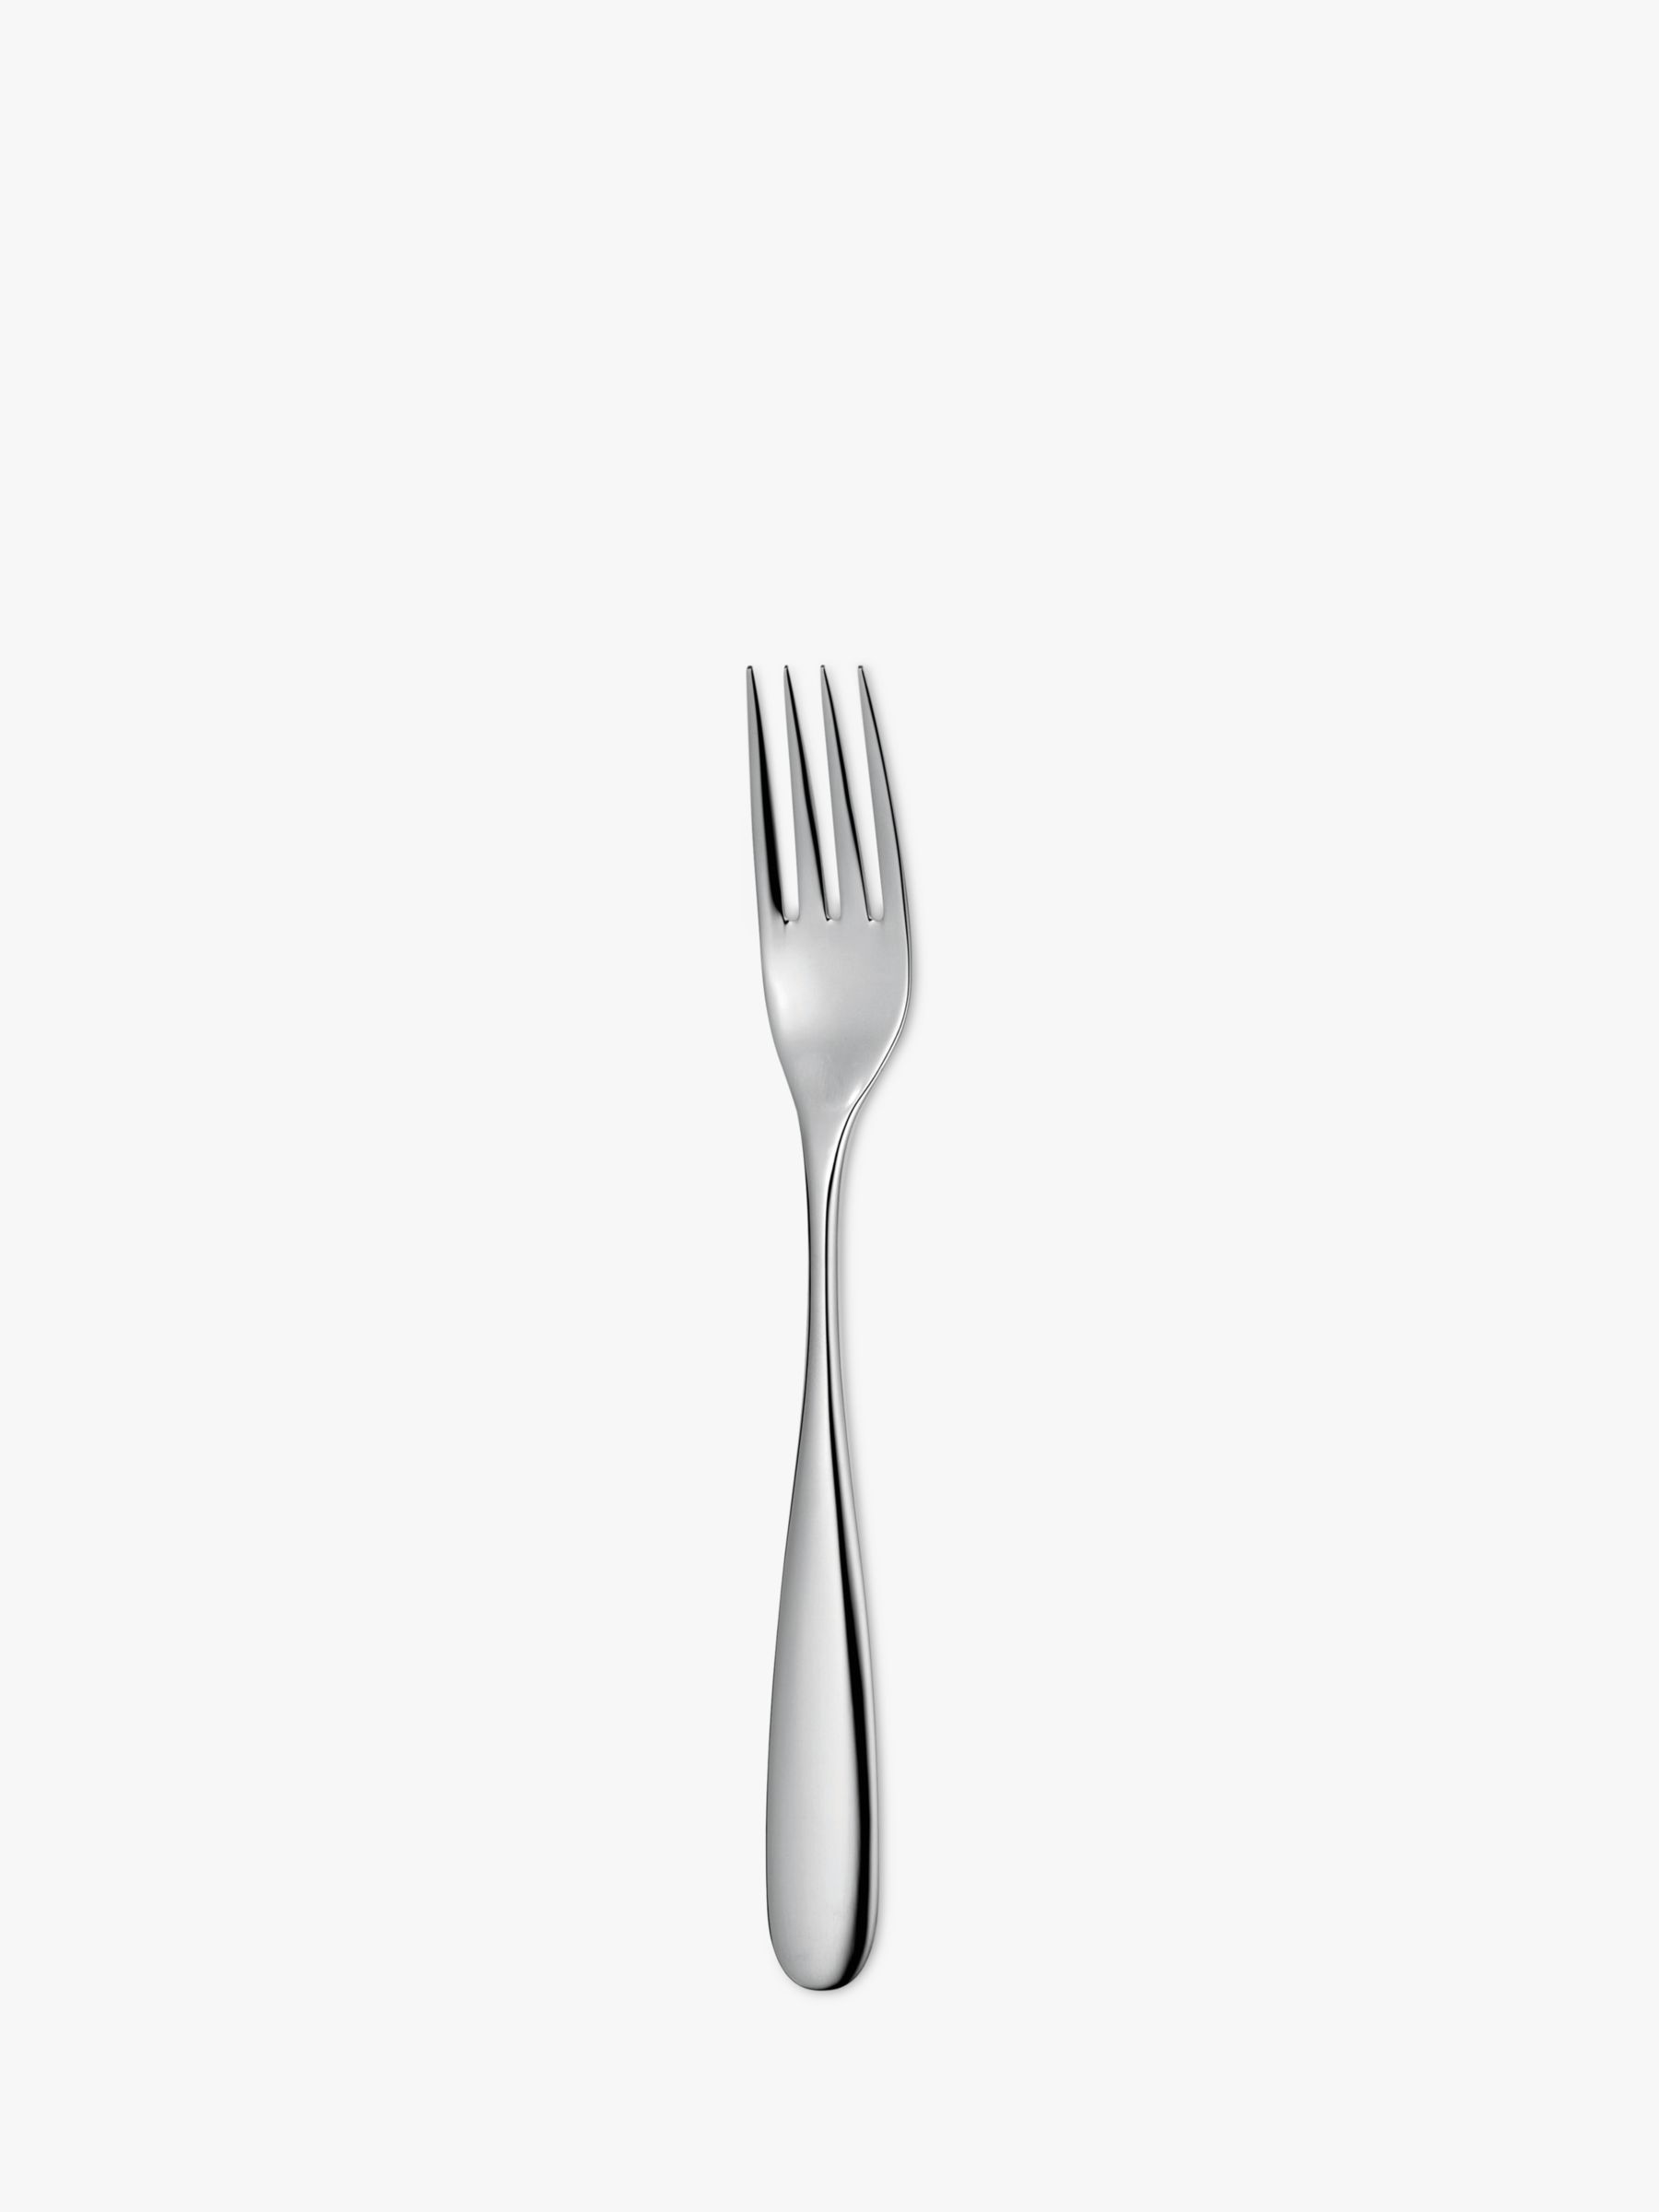 Robert Welch Stanton Table Fork, Stainless Steel